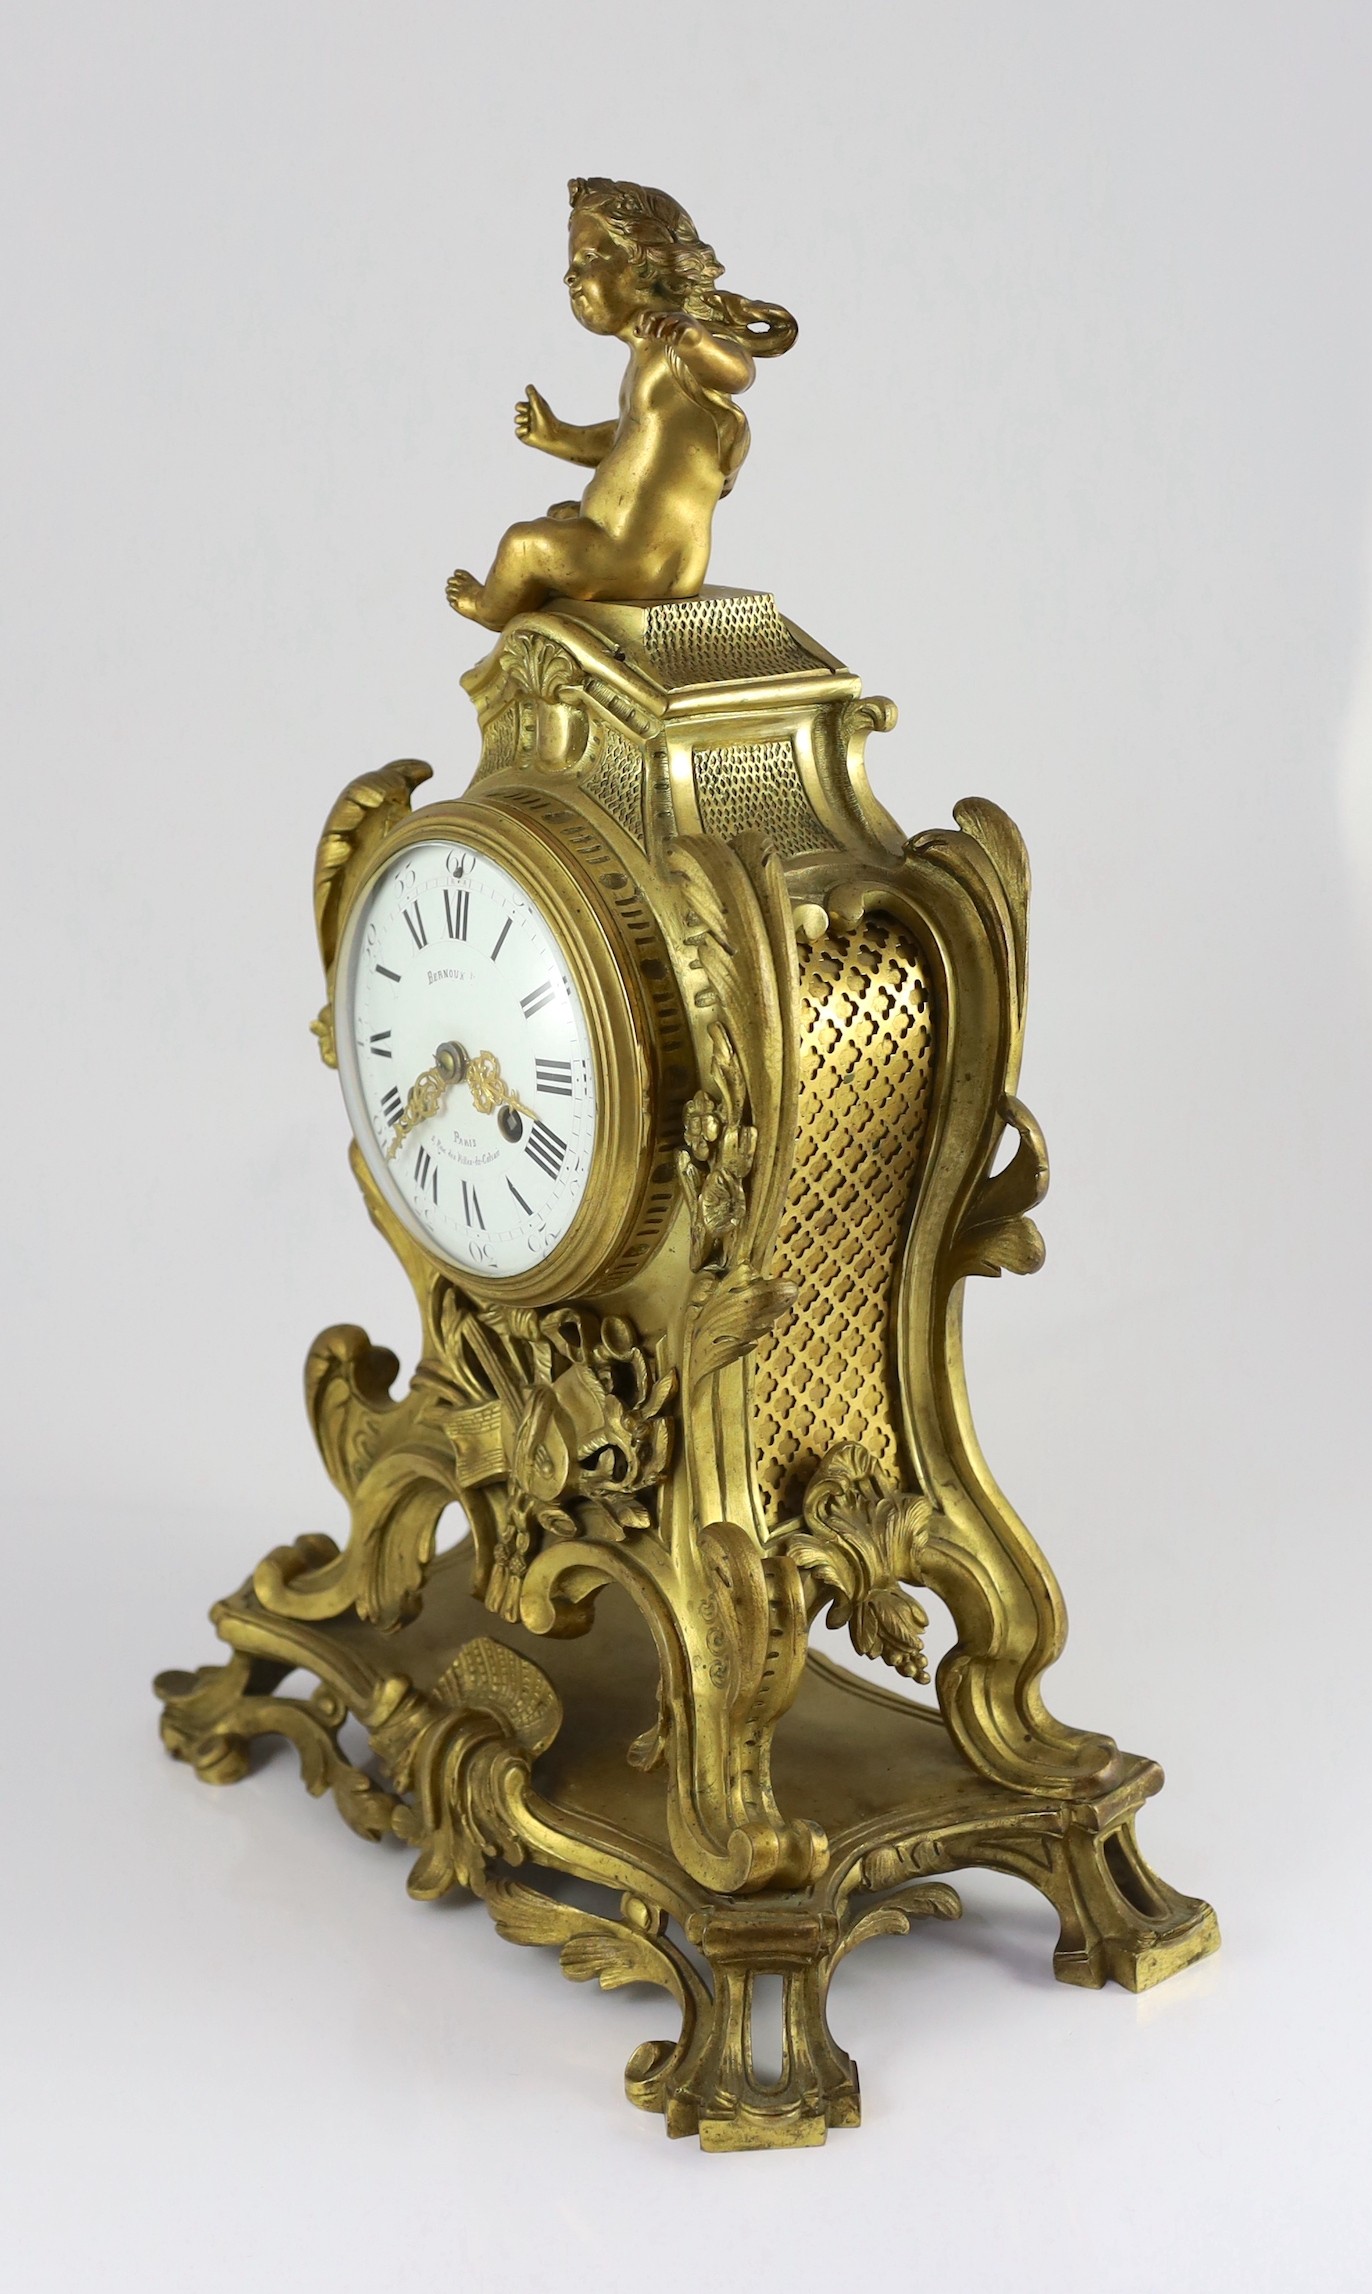 Bernoux of Paris. A 19th century Louis XV style ormolu mantel clock, with putto finial, enamelled - Image 4 of 6